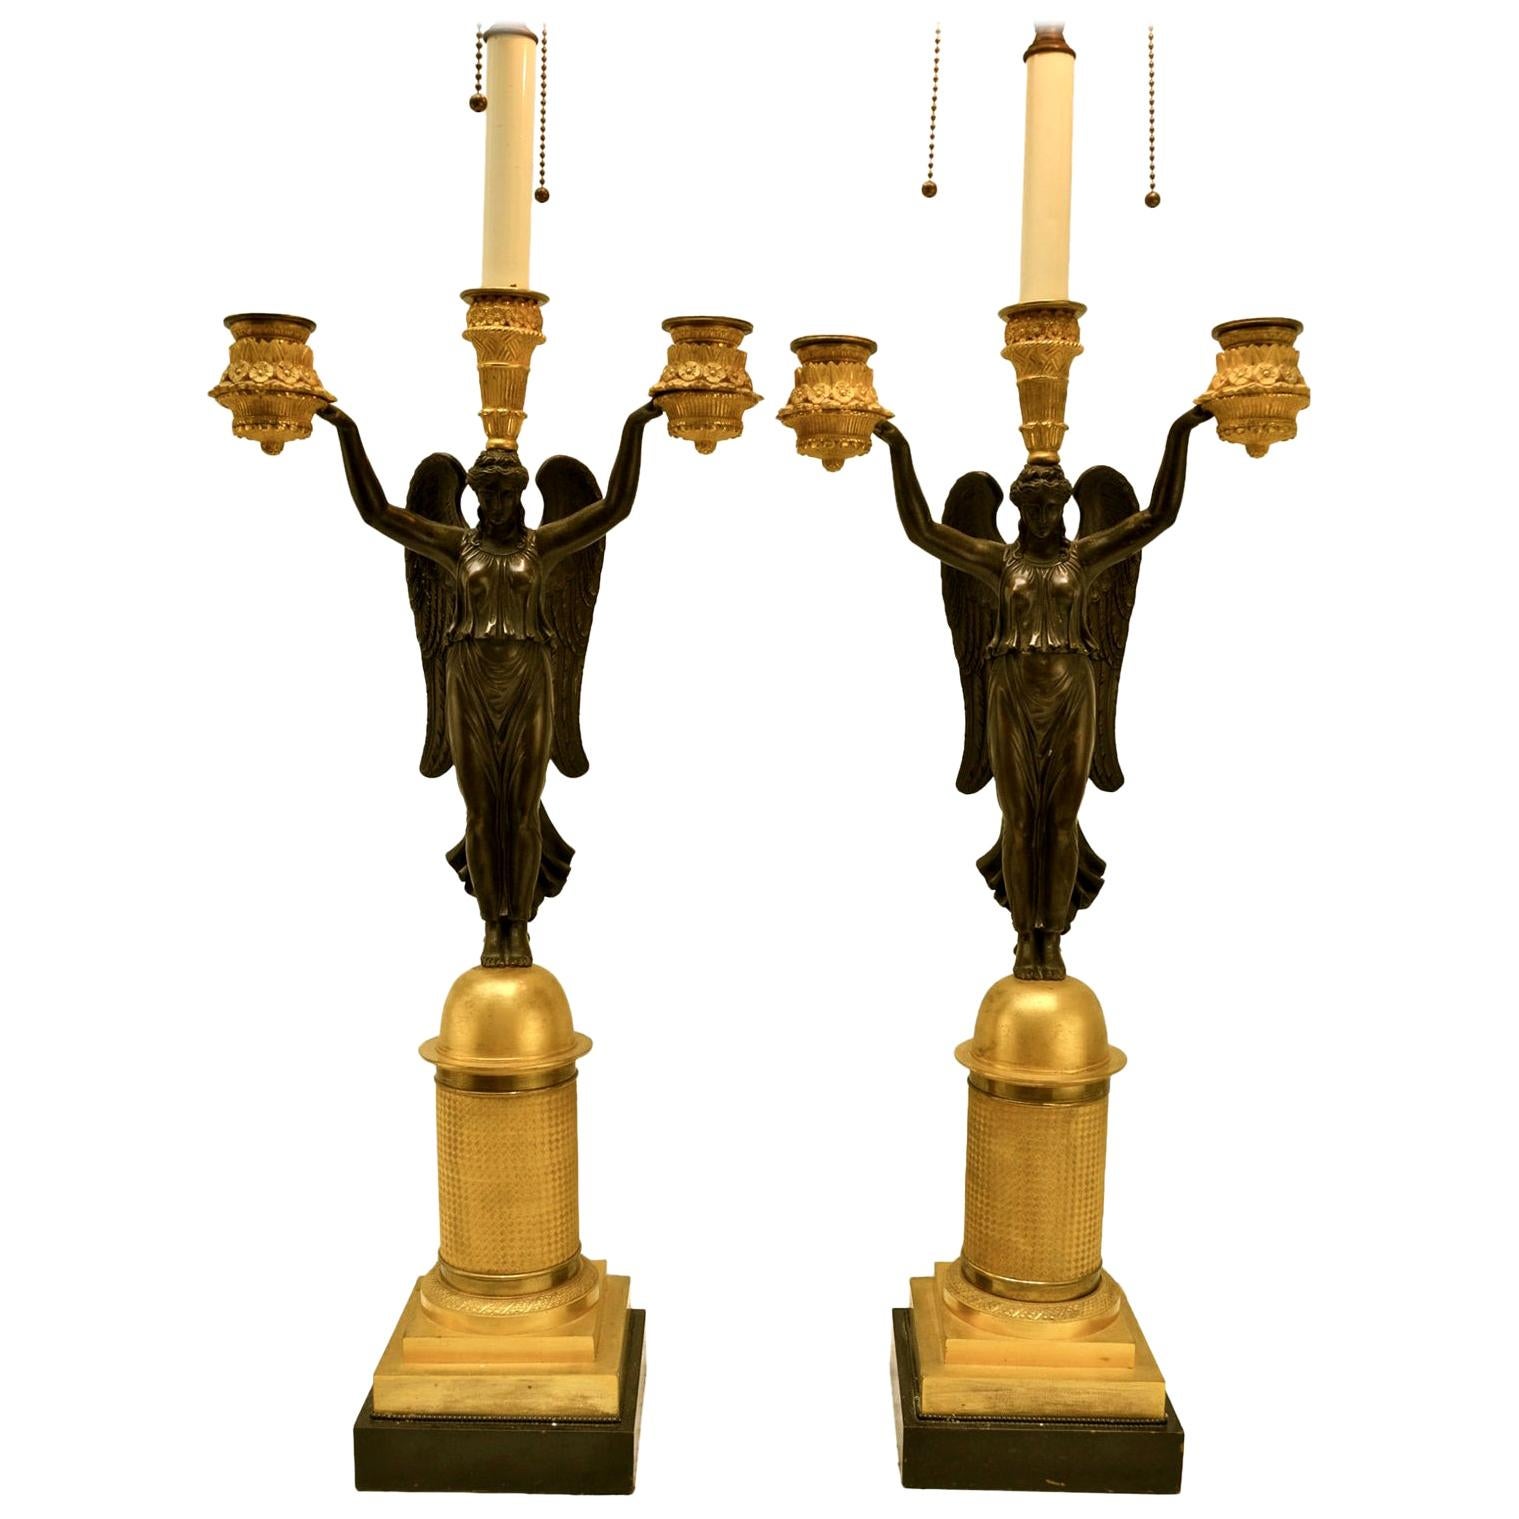 Pair of Bronze French Empire Victory Candelabra Lamps